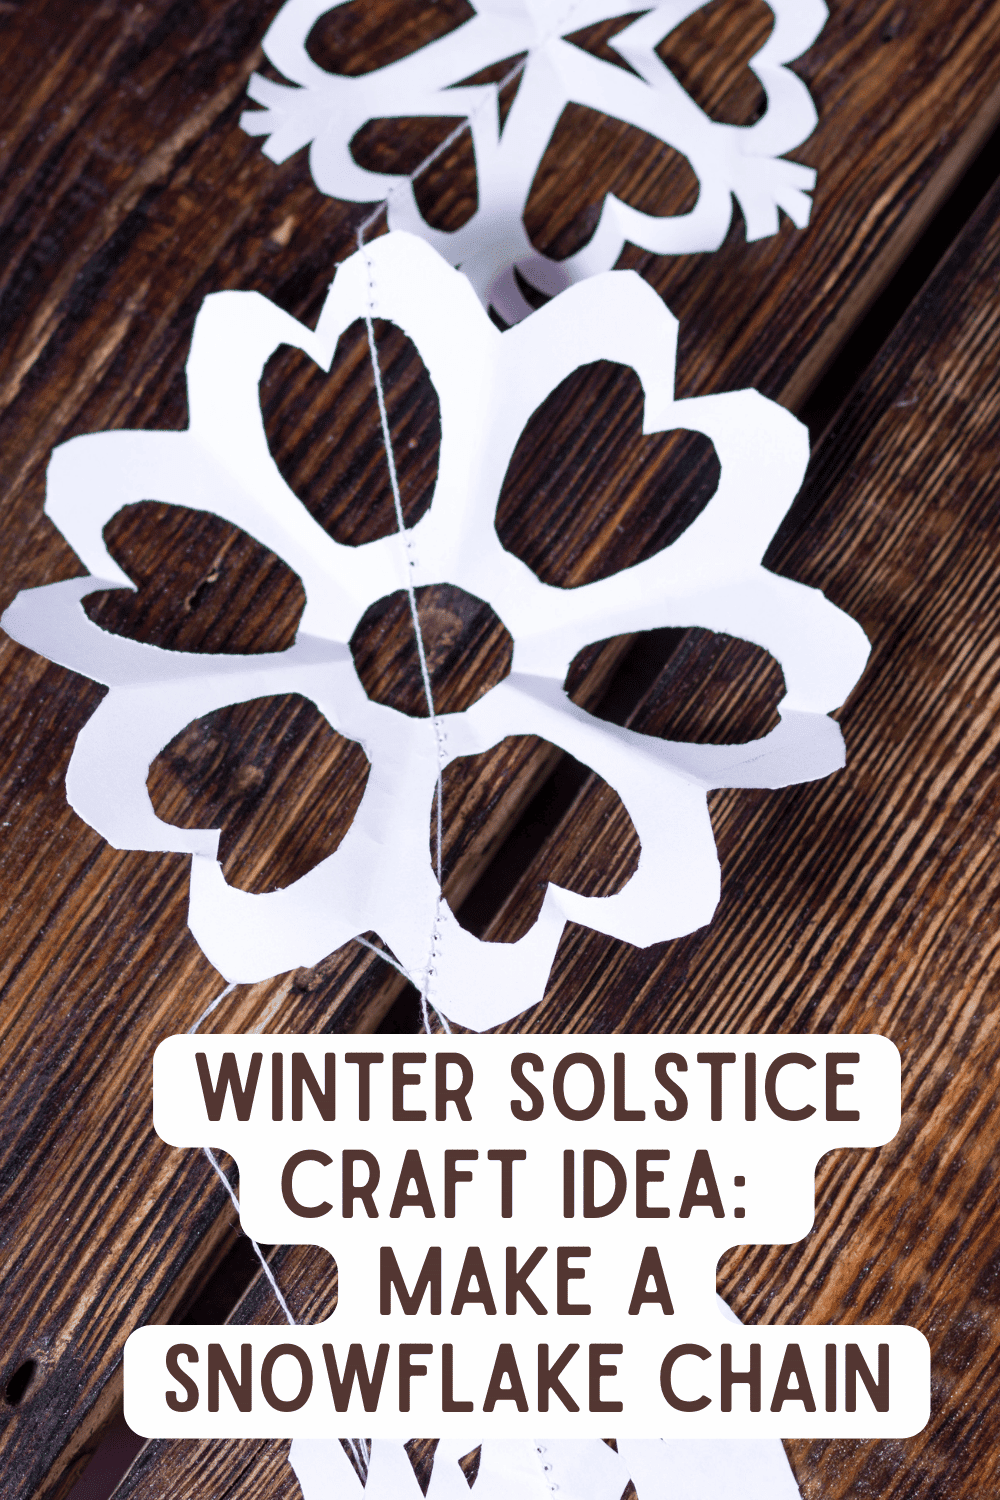 Winter Solstice Craft Projects Ideas - Winter Solstice Paper Snowflake Chain